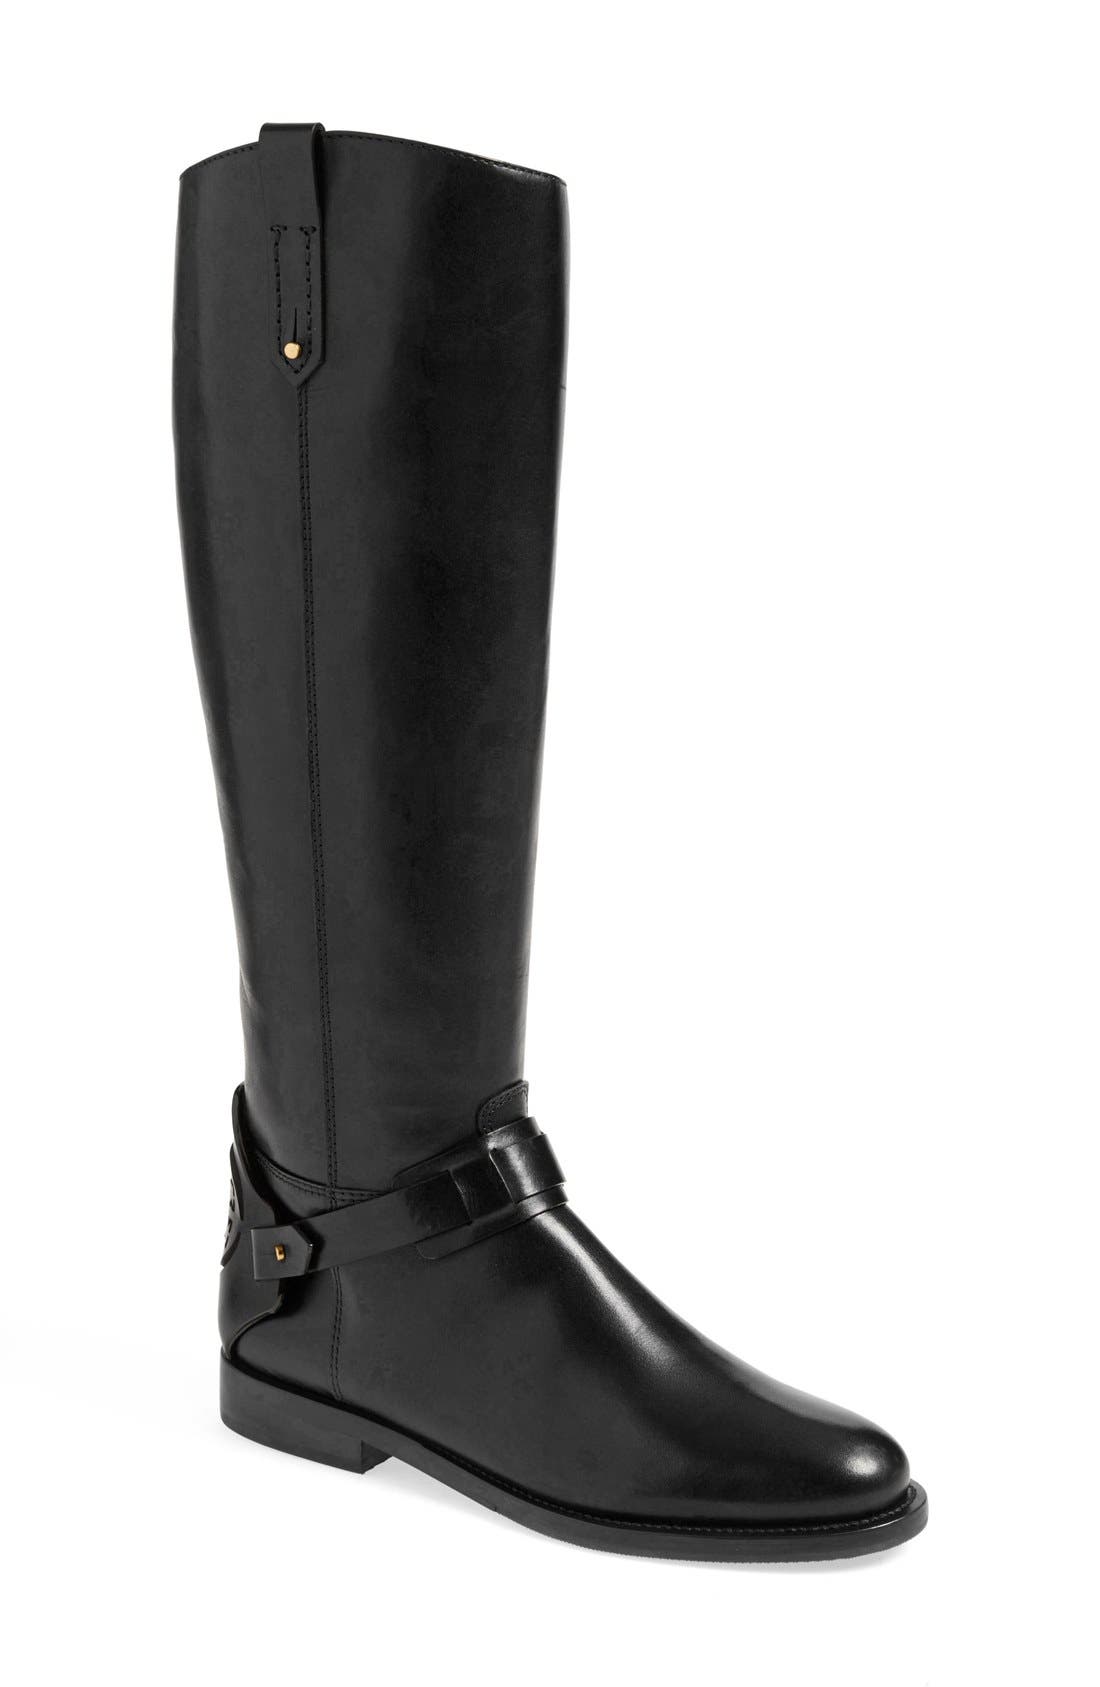 tory burch black leather boots